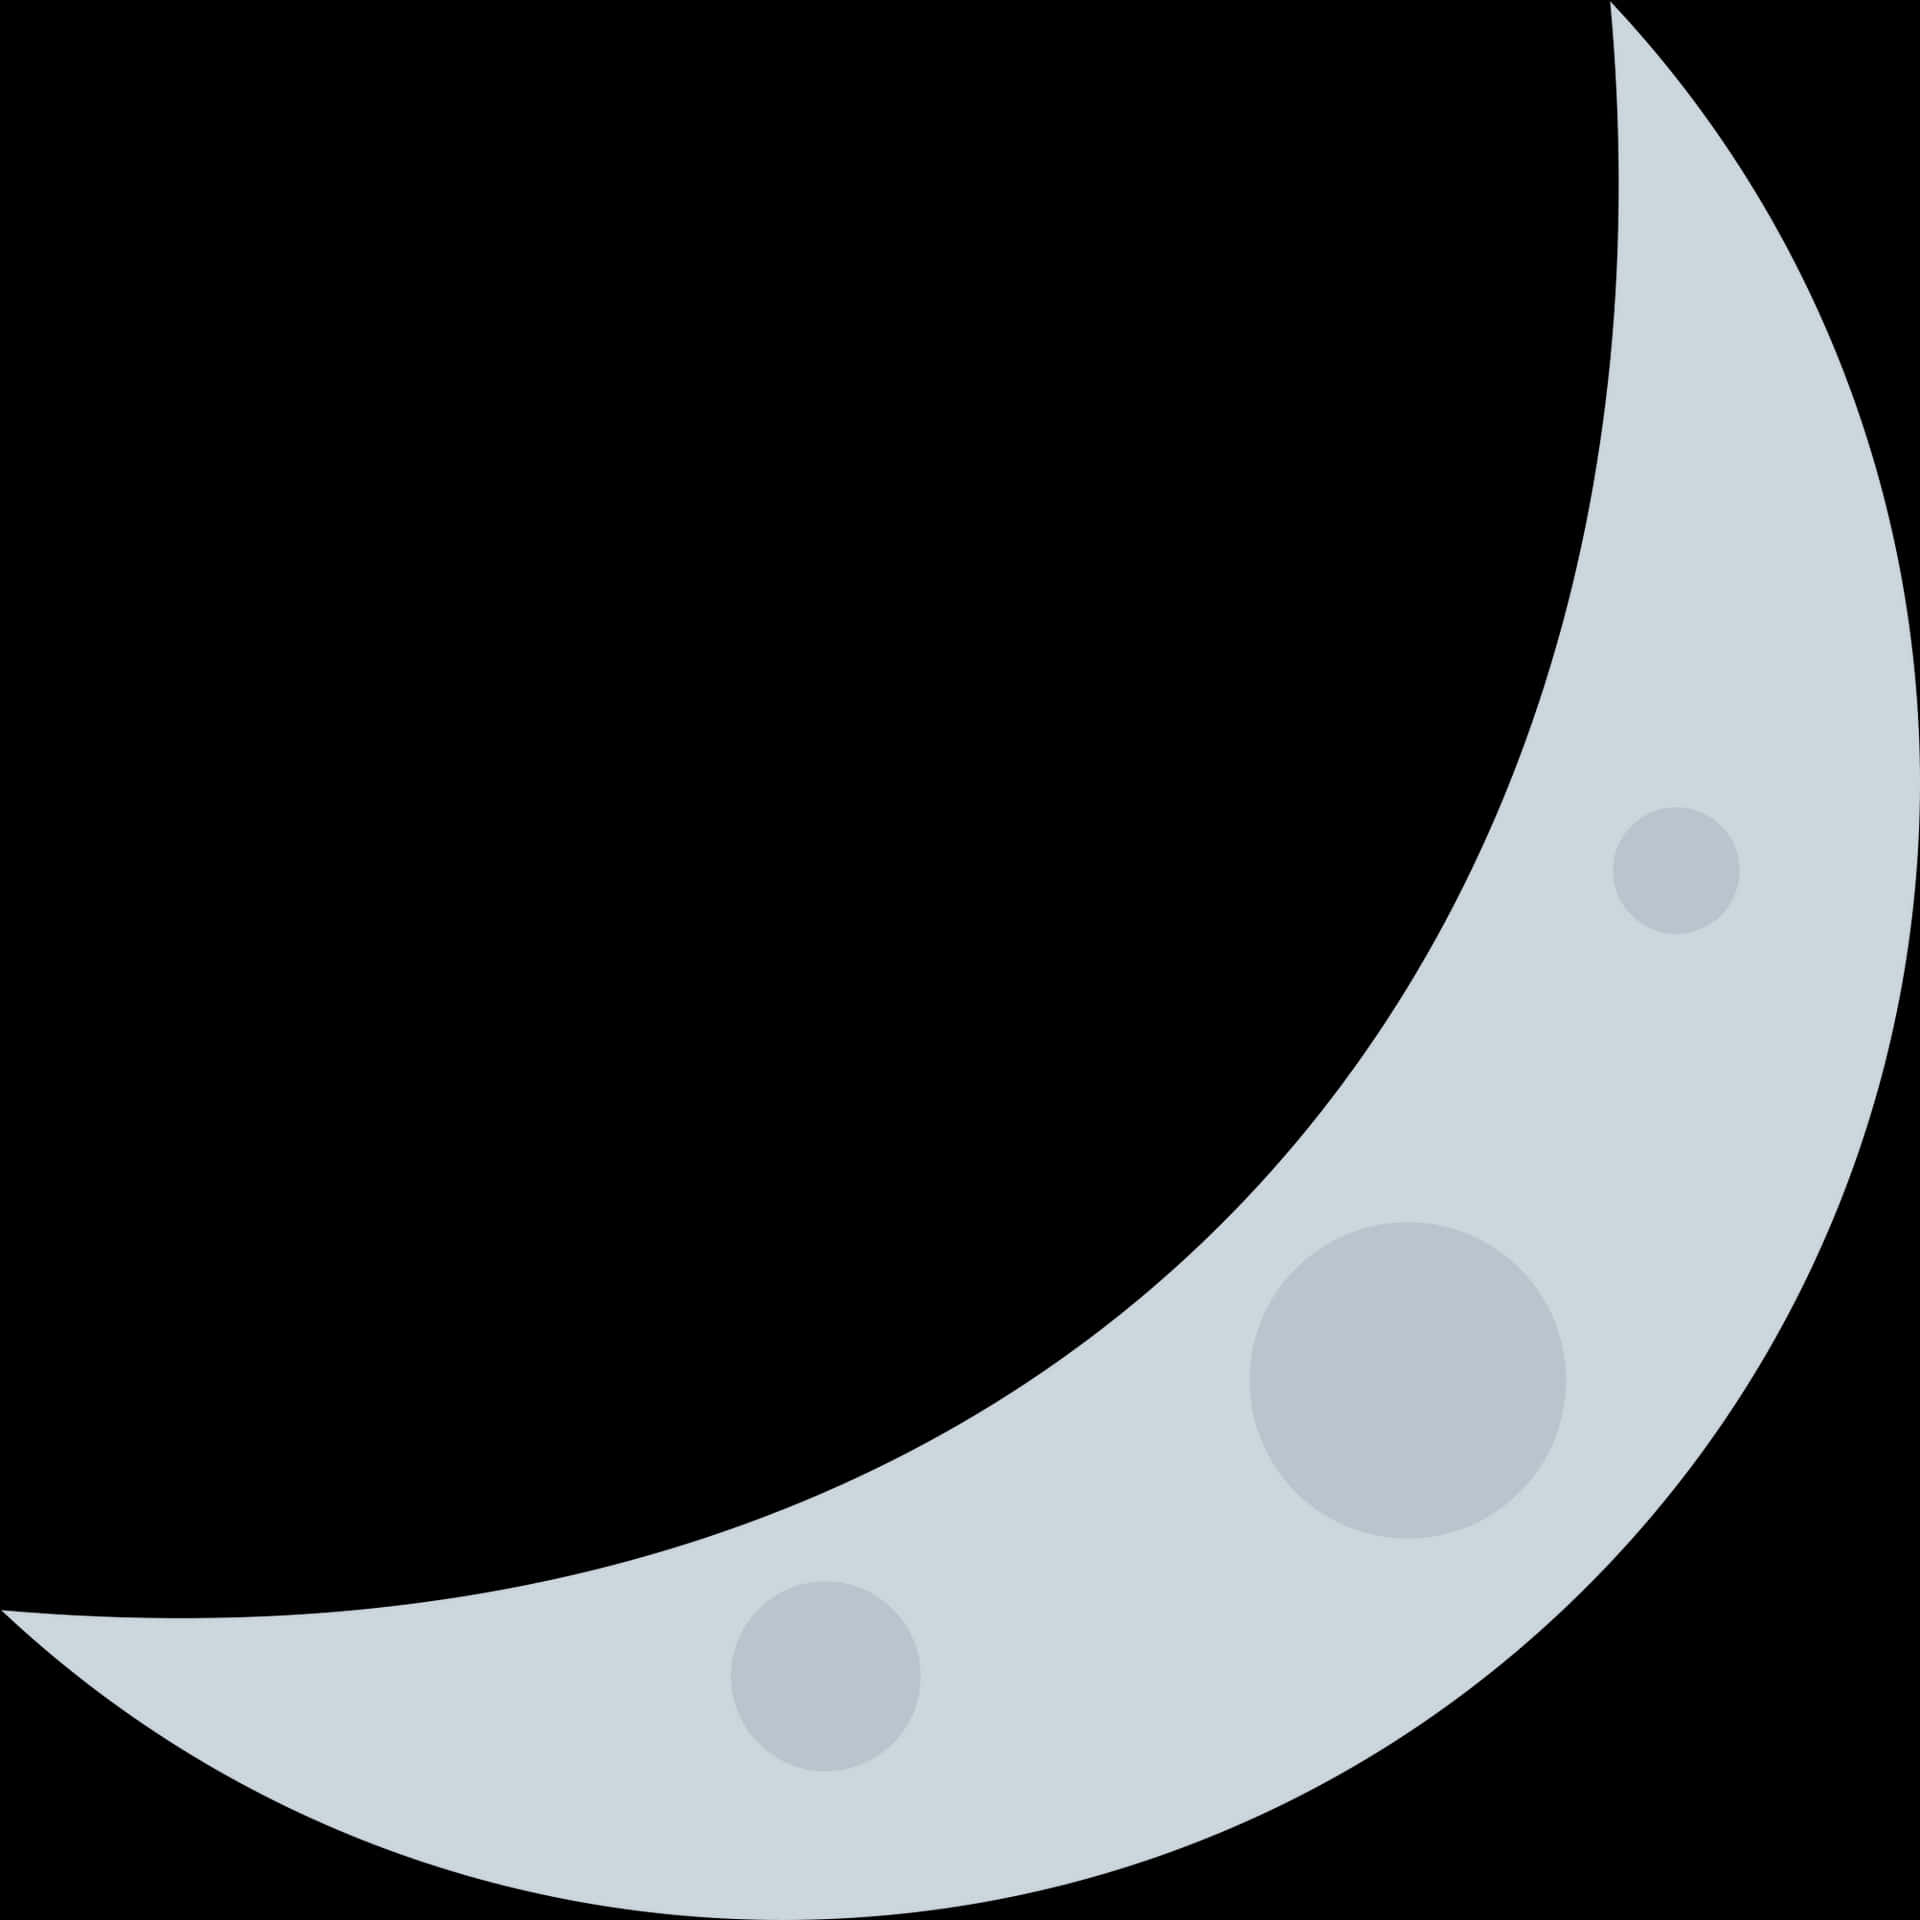 Stylized Crescent Moon Graphic PNG